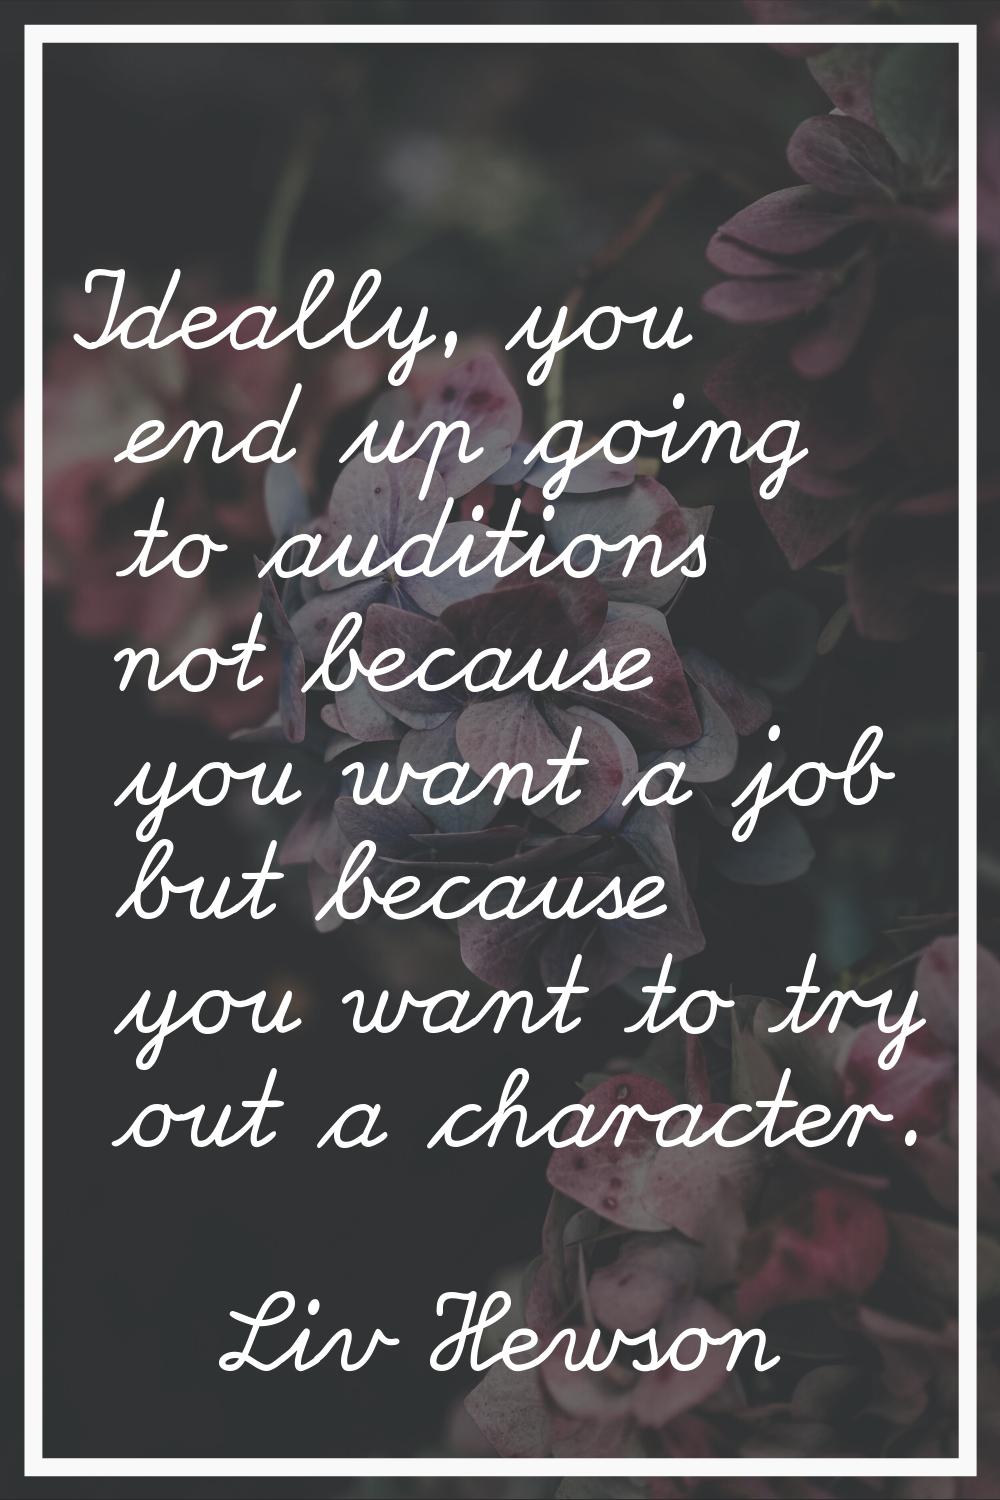 Ideally, you end up going to auditions not because you want a job but because you want to try out a